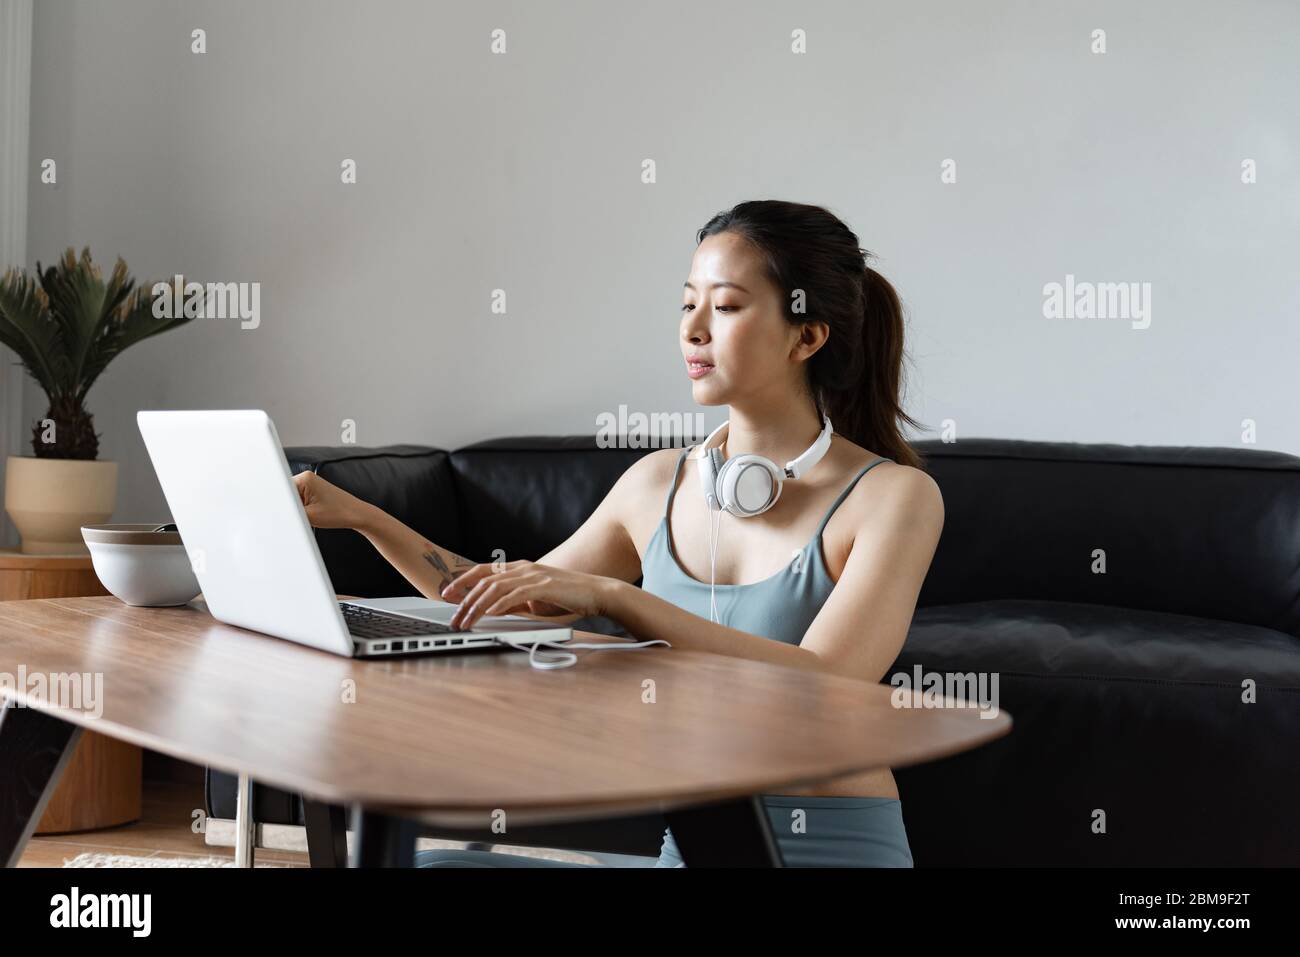 A young Asian woman using a computer in the living room Stock Photo